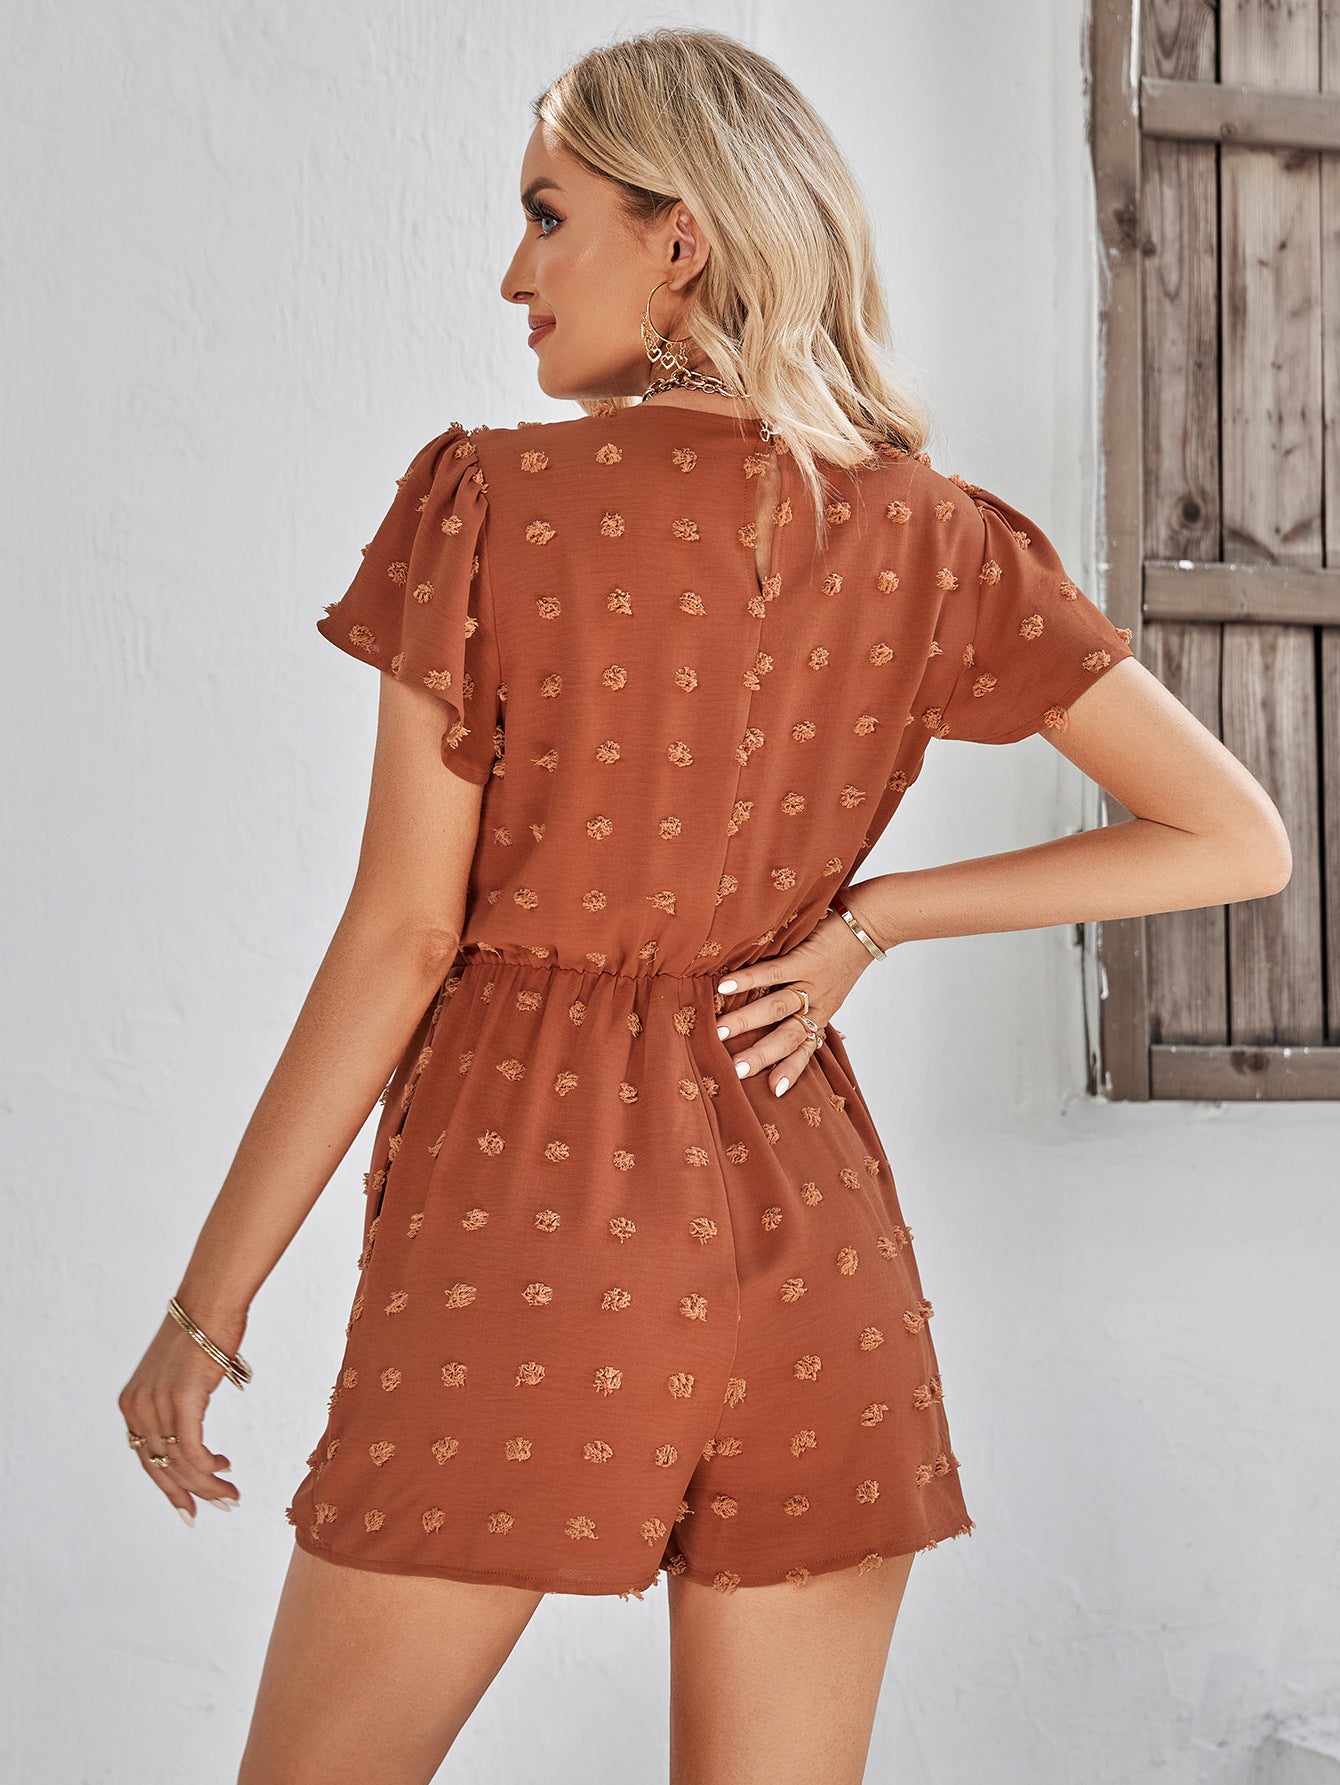 Swiss Dot Lace Trim Flutter Sleeve Romper with Pockets Playsuit  Sunset and Swim   